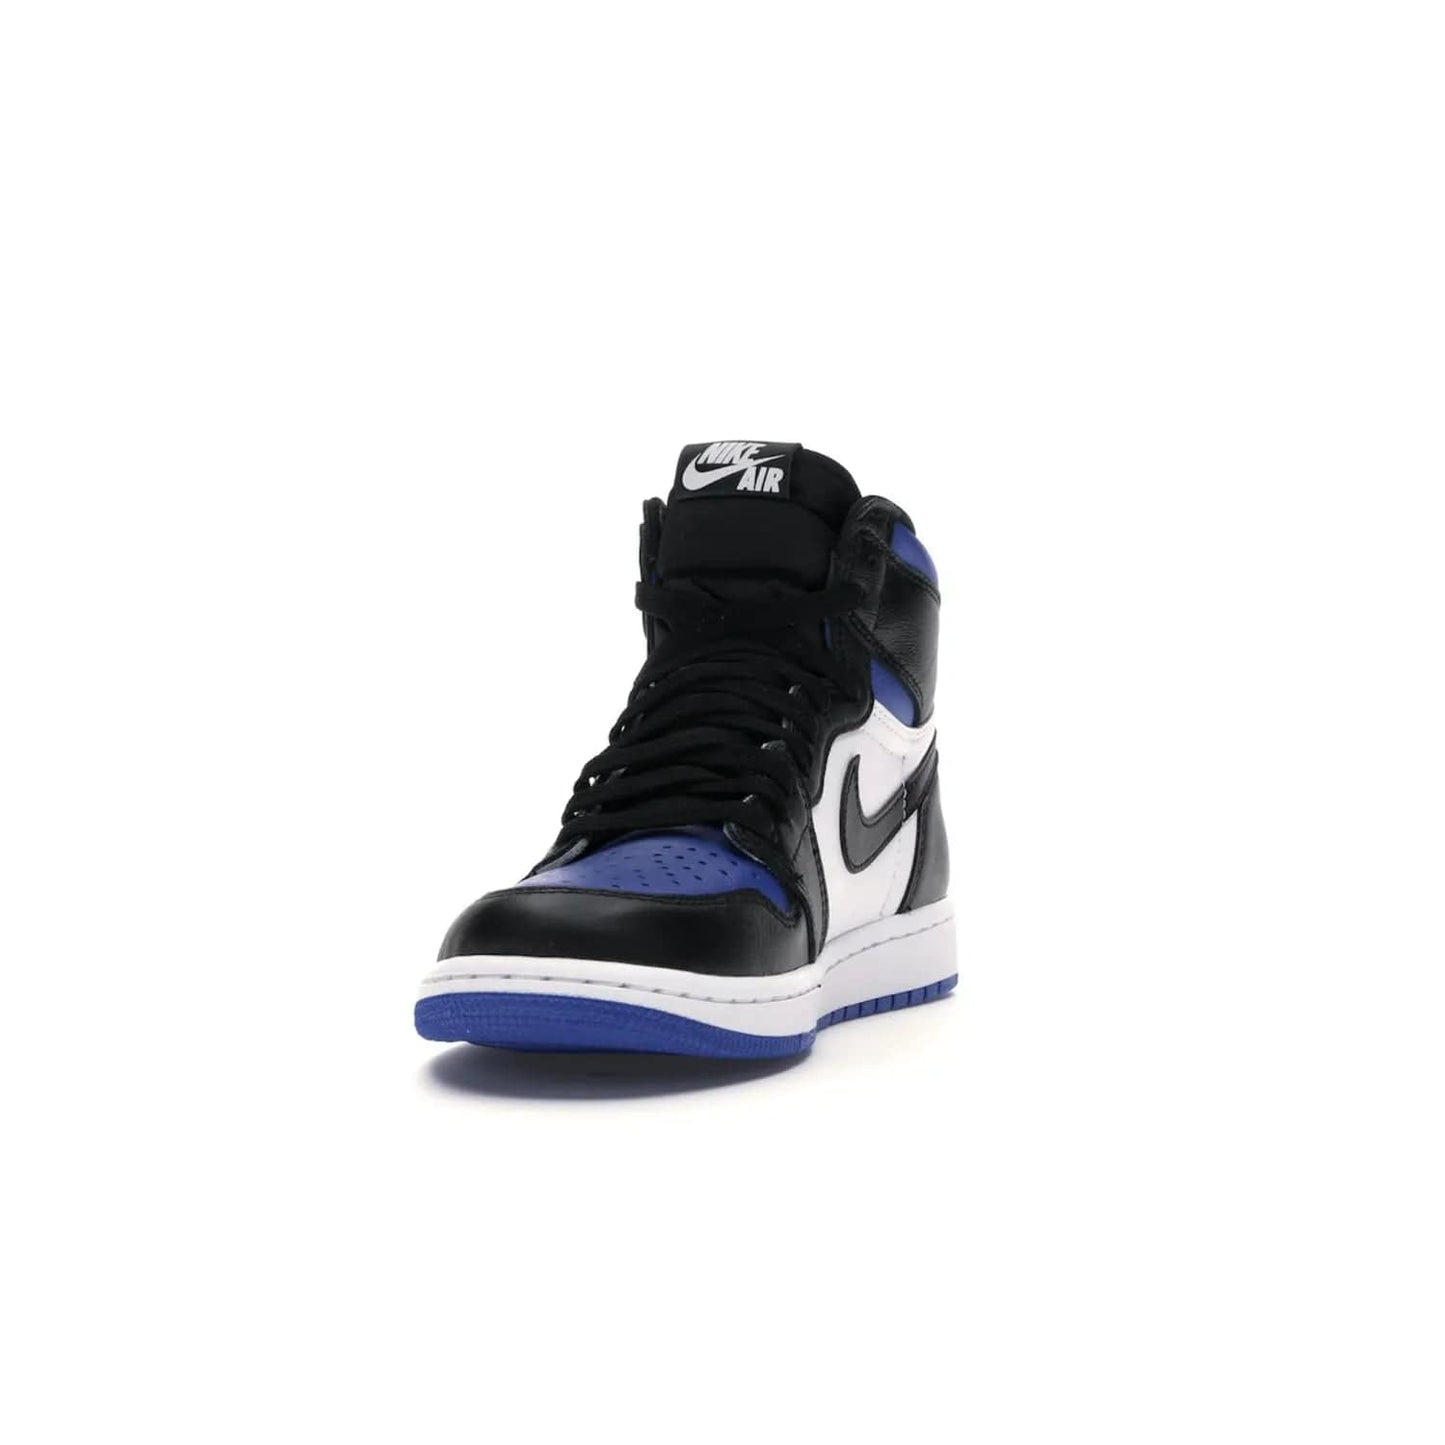 Jordan 1 Retro High Royal Toe - Image 12 - Only at www.BallersClubKickz.com - Refresh your look with the Jordan 1 Retro High Royal Toe. This classic AJ 1 sports a white and royal leather upper, black leather overlays, and branded leather tongue tag. Pick up today and set the streets ablaze.